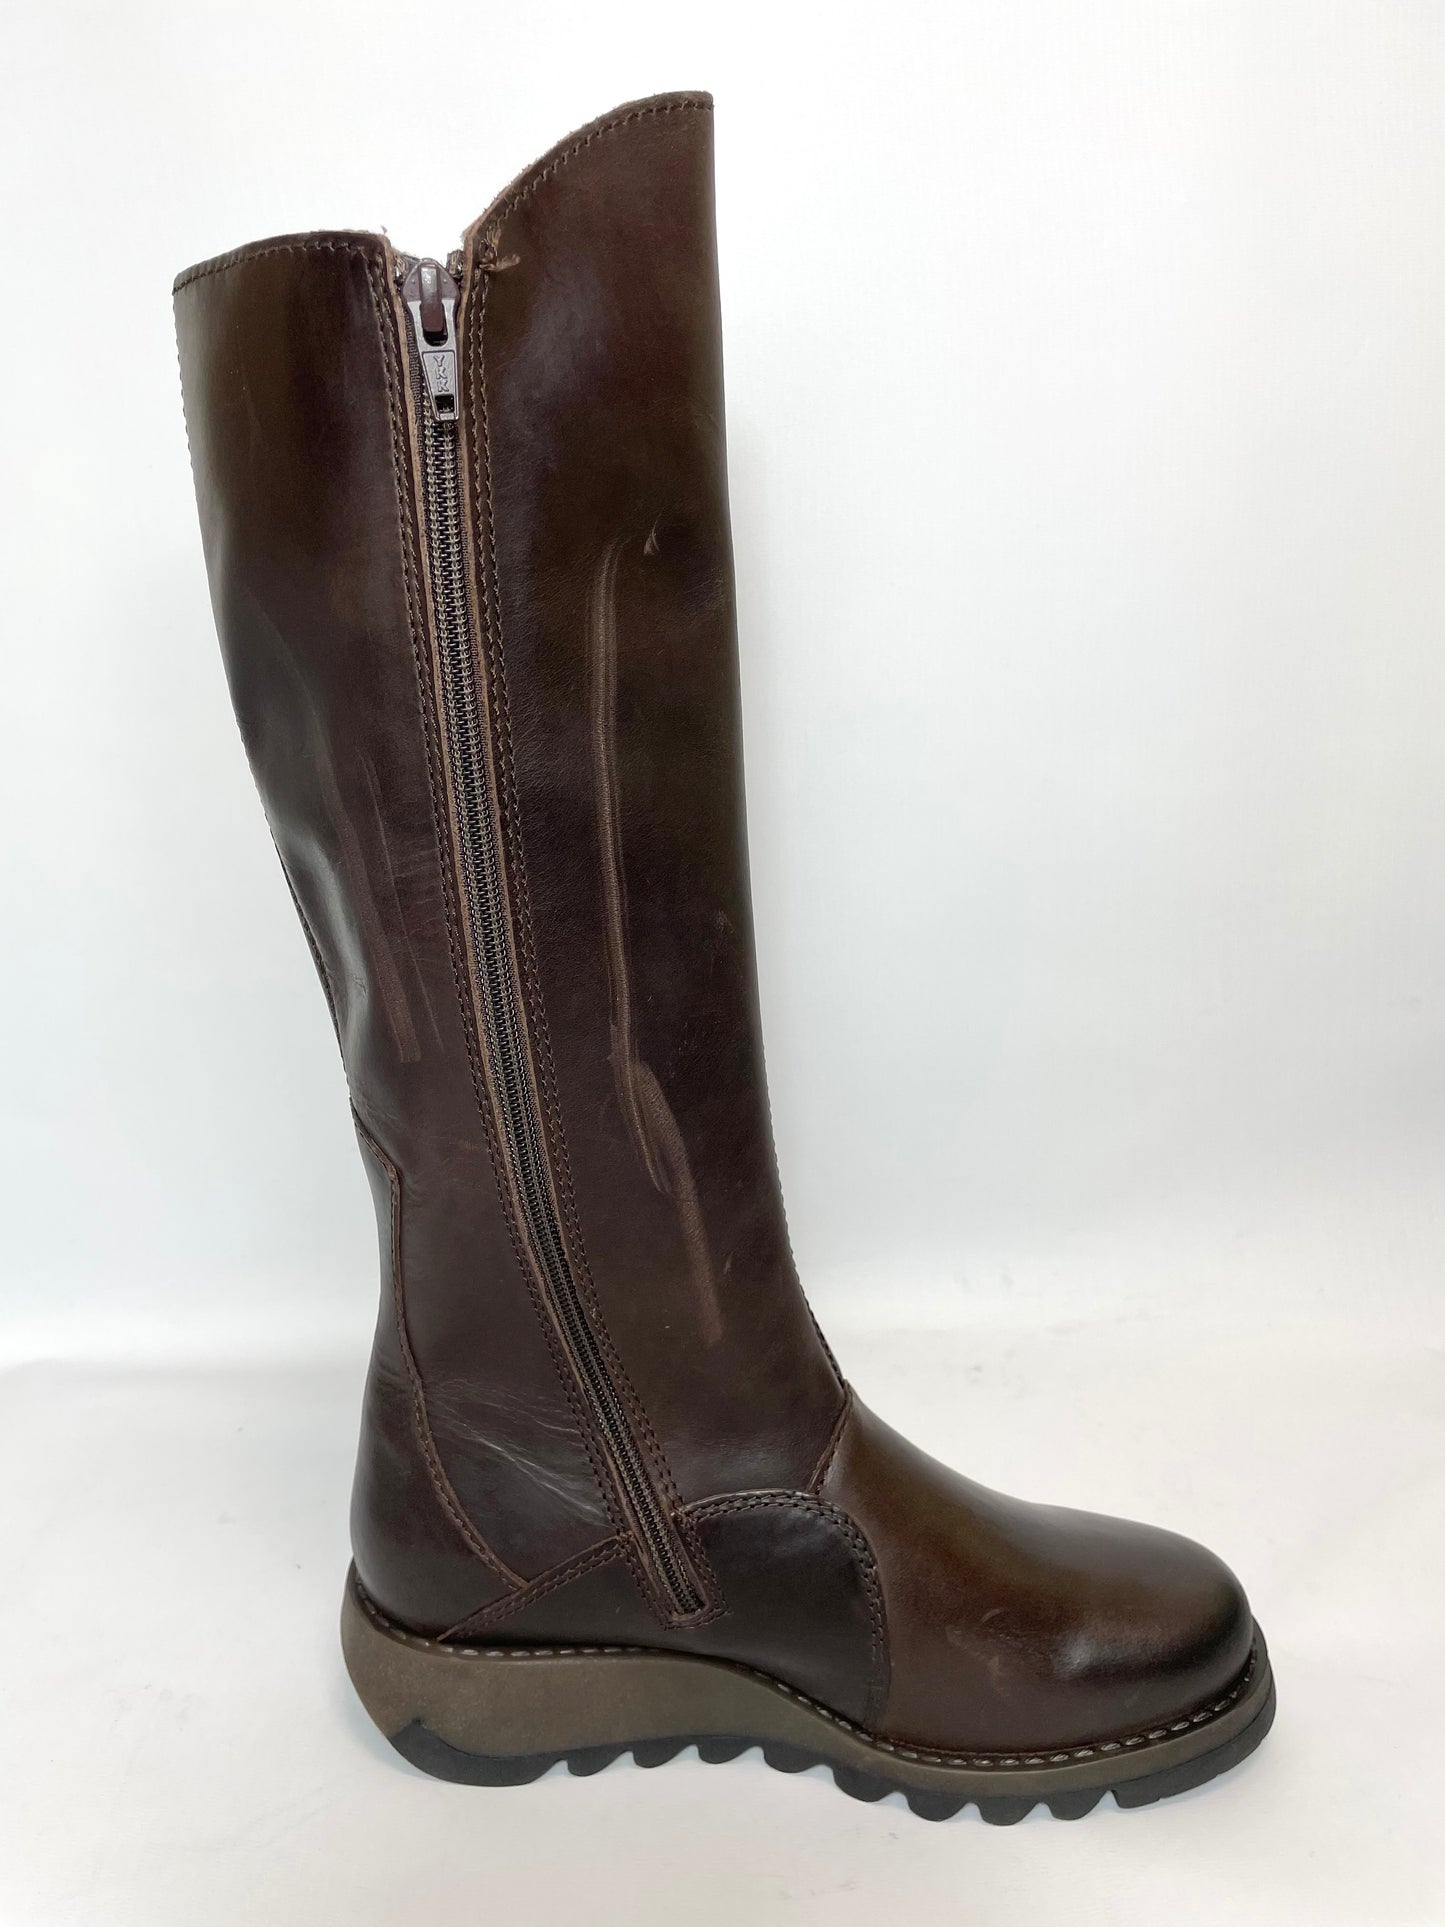 Fly London Mol 2 Wedge Zip Up Womens Knee High Boots Brown